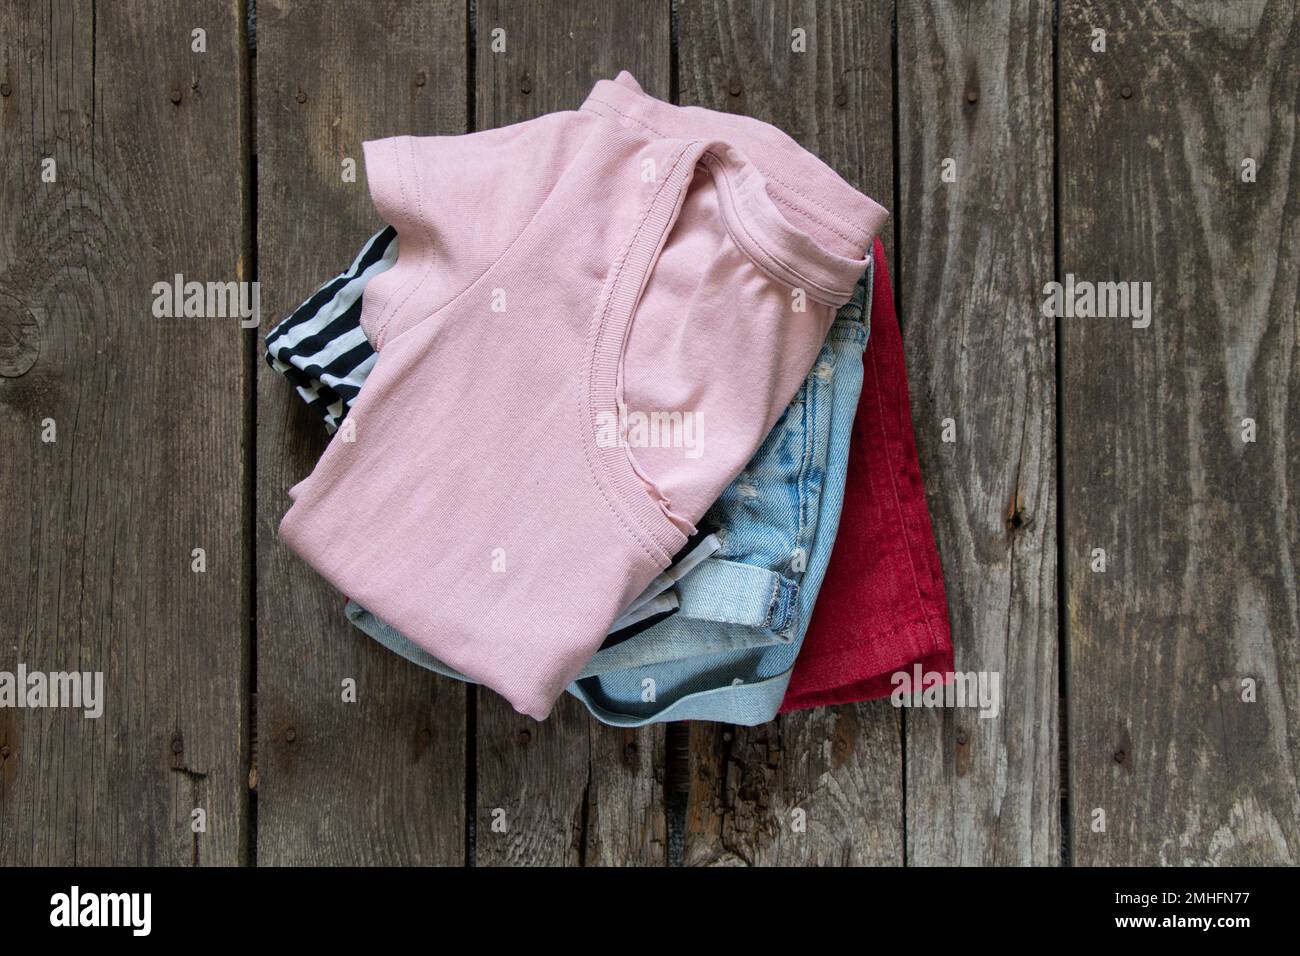 womens t-shirt and denim shorts lay on rustic brown background, womens clothing, fashion, many womens things Stock Photo